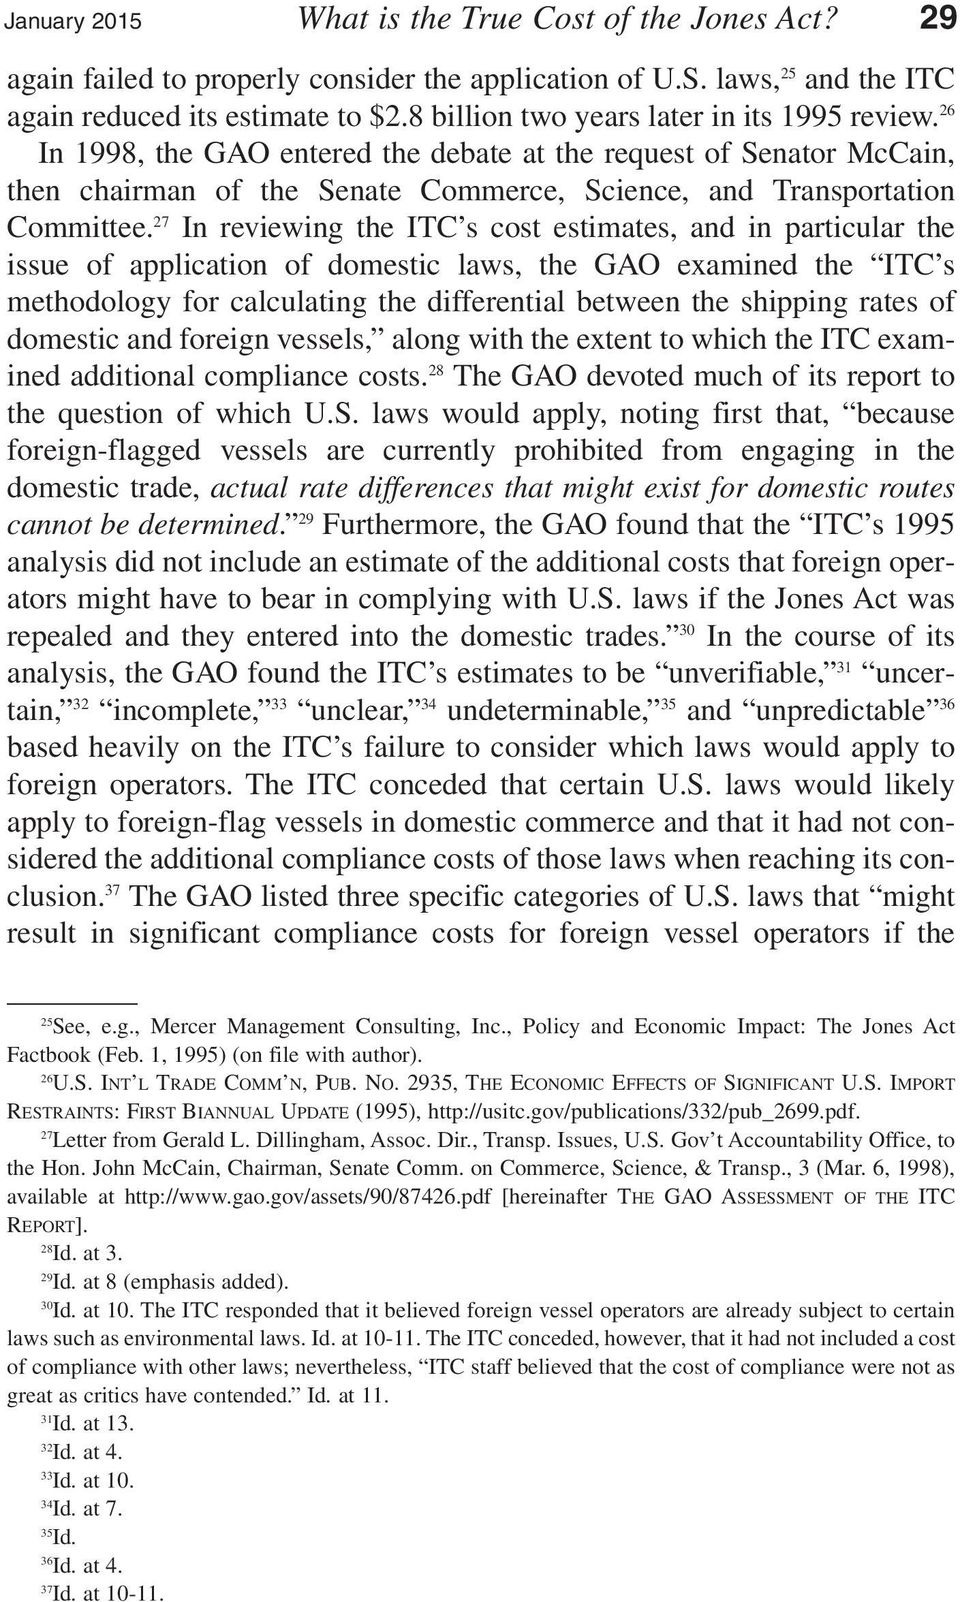 27 In reviewing the ITC s cost estimates, and in particular the issue of application of domestic laws, the GAO examined the ITC s methodology for calculating the differential between the shipping